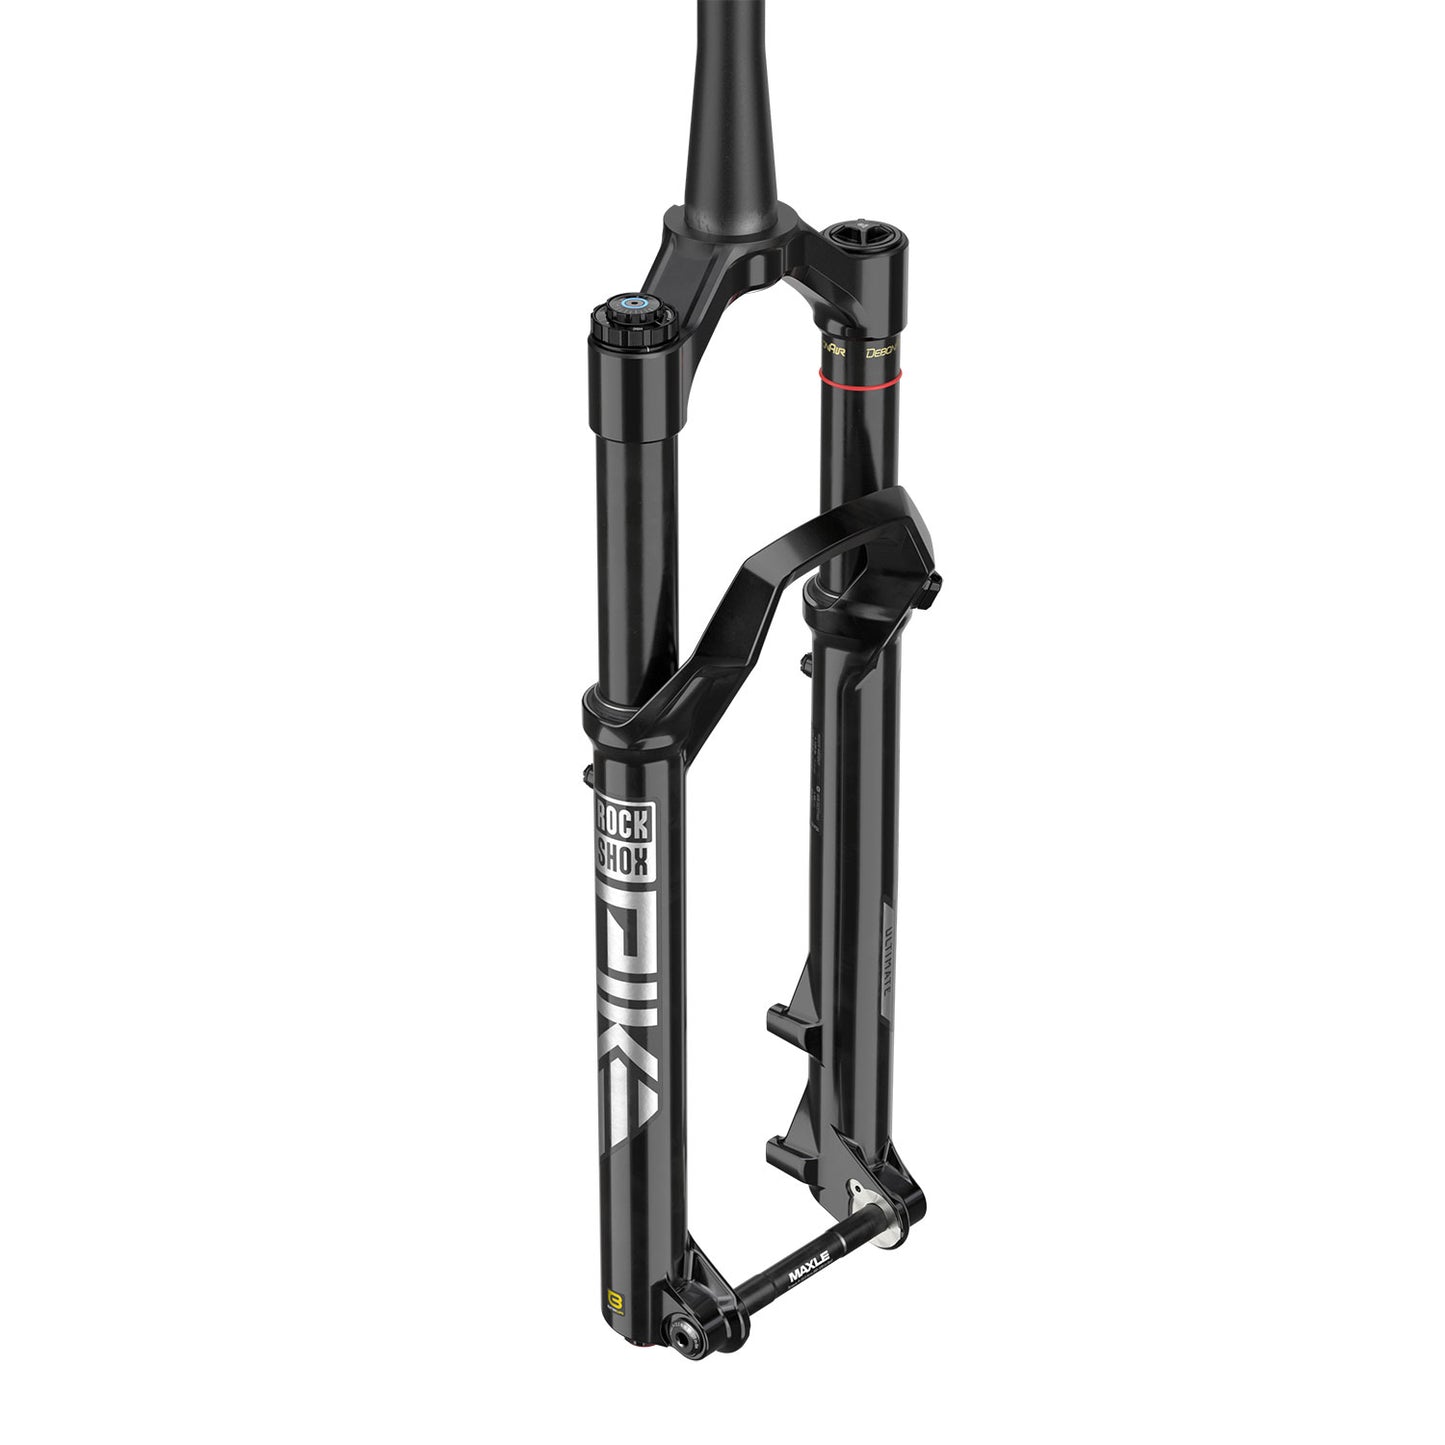 Rockshox Pike Ultimate Charger 3 RC2 Debonair+ C1 Fork - Gloss Black - 15x110mm Boost - Maxle Stealth - 37mm - 120mm - 2023 - Tapered 1 1-8-1.5 Inch - 27.5 Inch